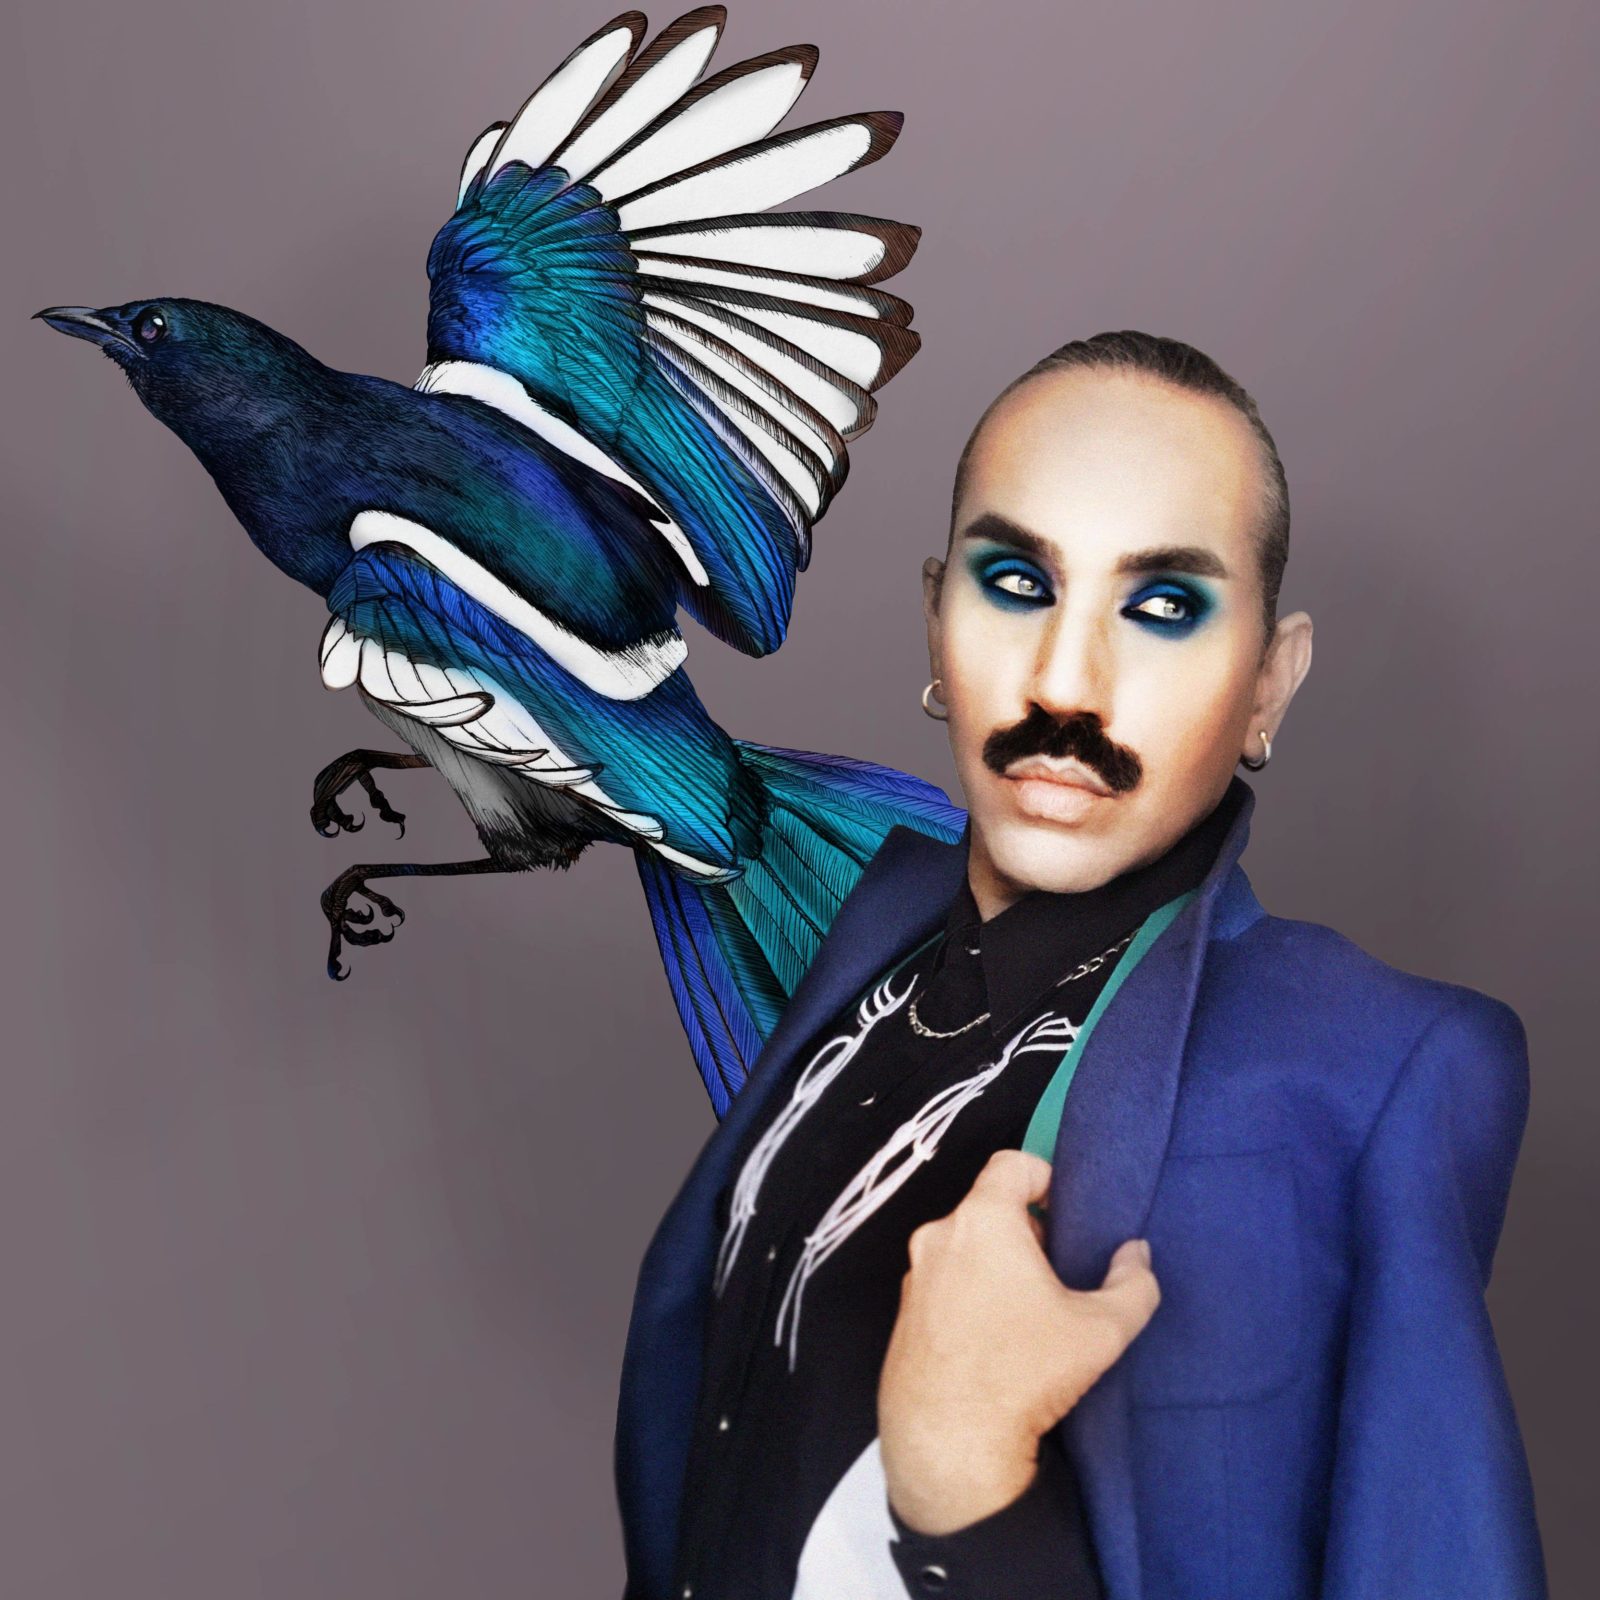 Paul Harfleet is dressed up as a Magpie, wearing a royal blue blazer and black smokey eye shadow with blue accents, his hair is slicked back and there is a detailed illustration of the bird behind him.